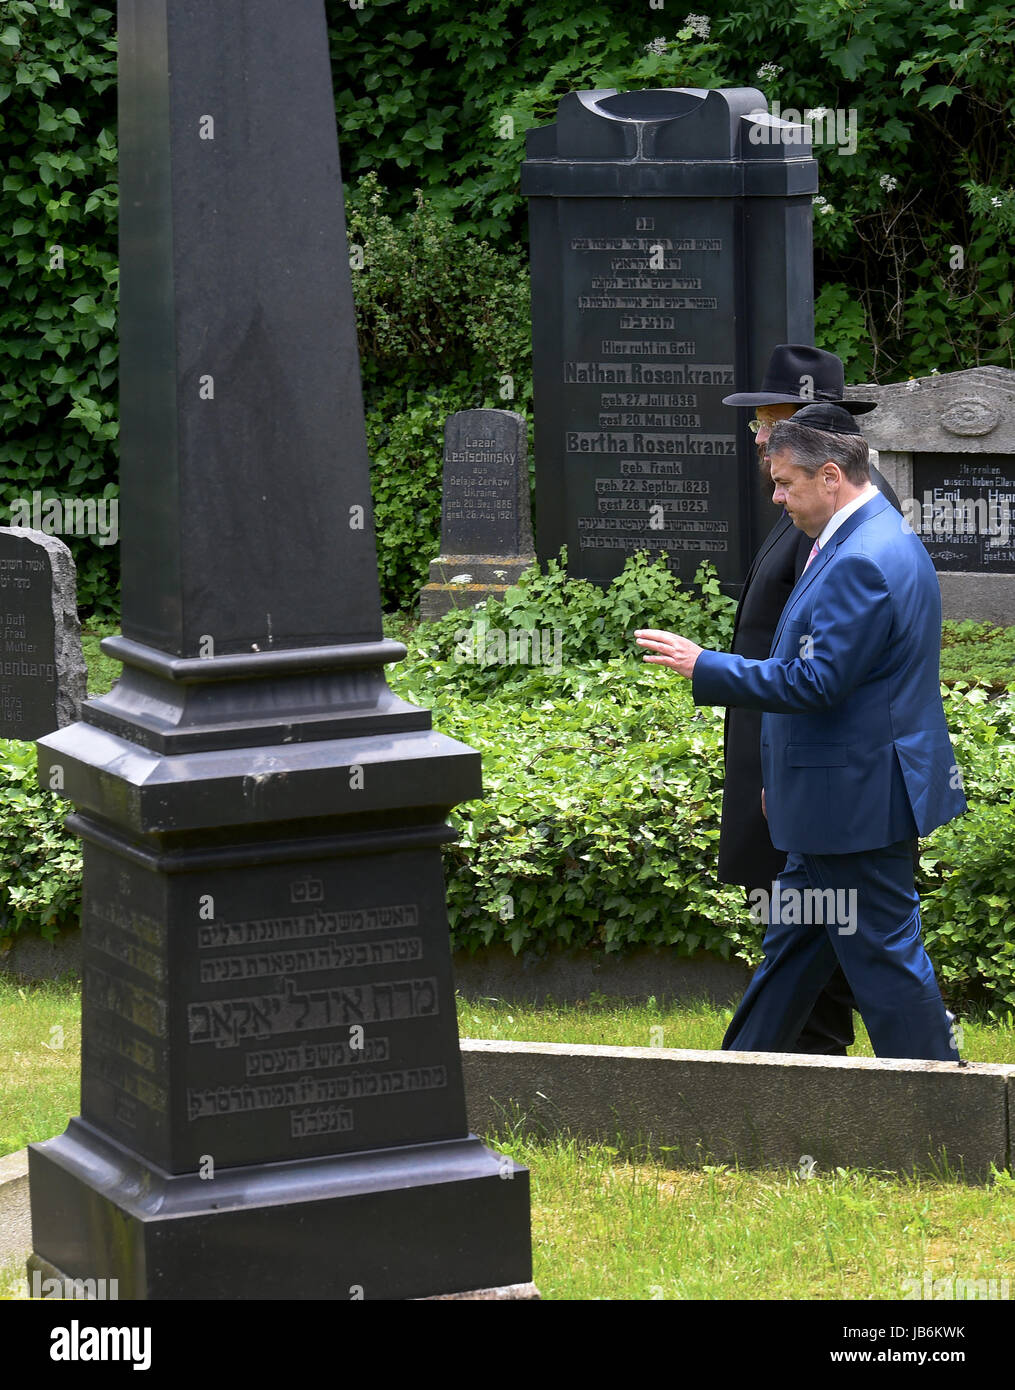 Goslar, Germany. 09th June, 2017. German Foreign Minister Sigmar Gabriel (SPD, R) visits together with Rabbi Yehuda Teichtal, rabbi of the Jewisch community in Berlin and the chairman of the Jewisch education centre, Chabad Lubawitsch, the Jewish cemetary at the Glockengiesserstrasse in Goslar, Germany, 09 June 2017. Photo: Holger Hollemann/dpa/Alamy Live News Stock Photo